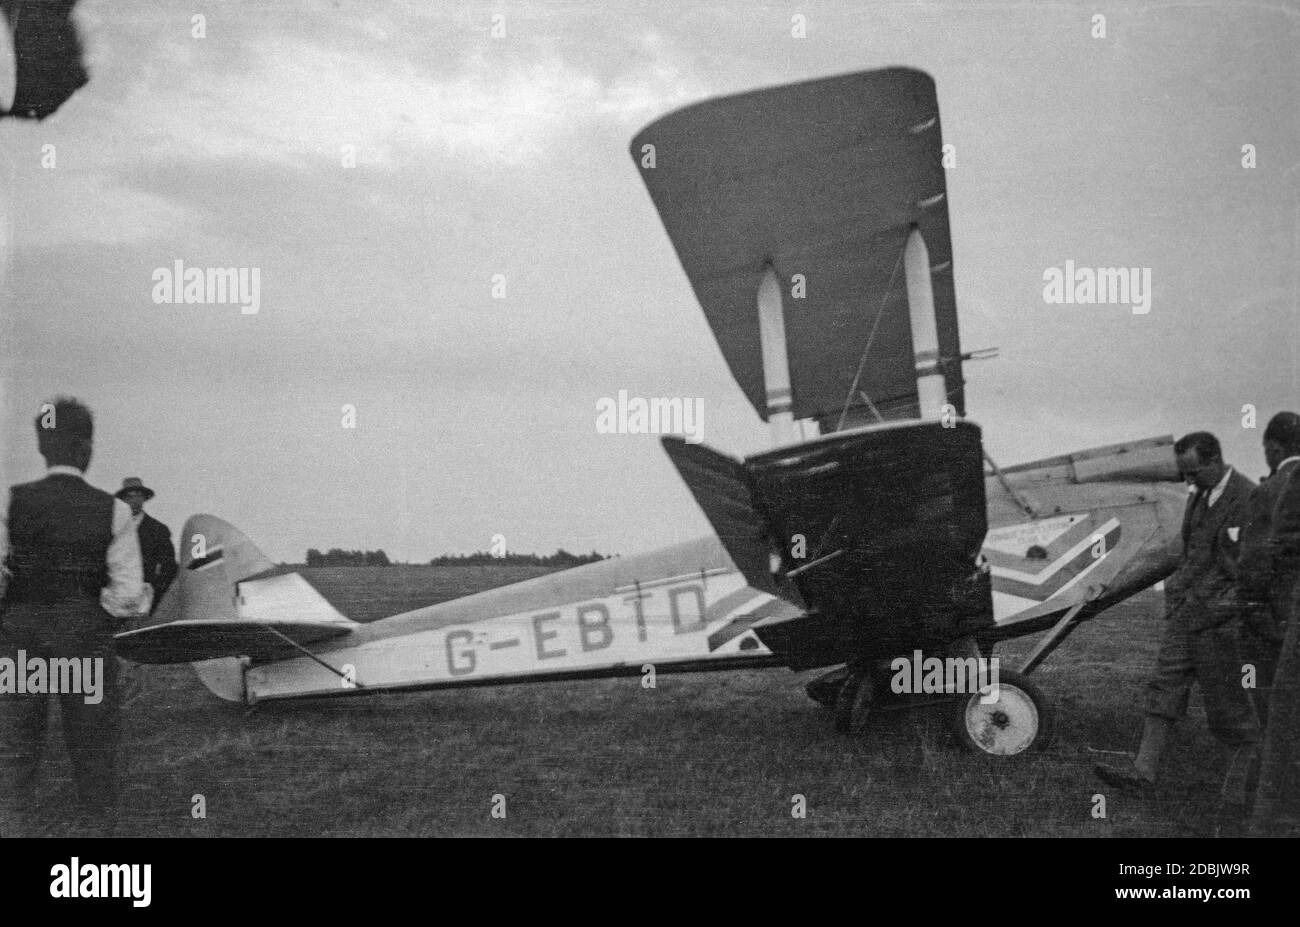 A De Havilland DH 60X Moth aeroplane, registration G-EBTD, at an airfield in England in 1937 after an undercarriage failure. Some men looking around the aircraft. Stock Photo